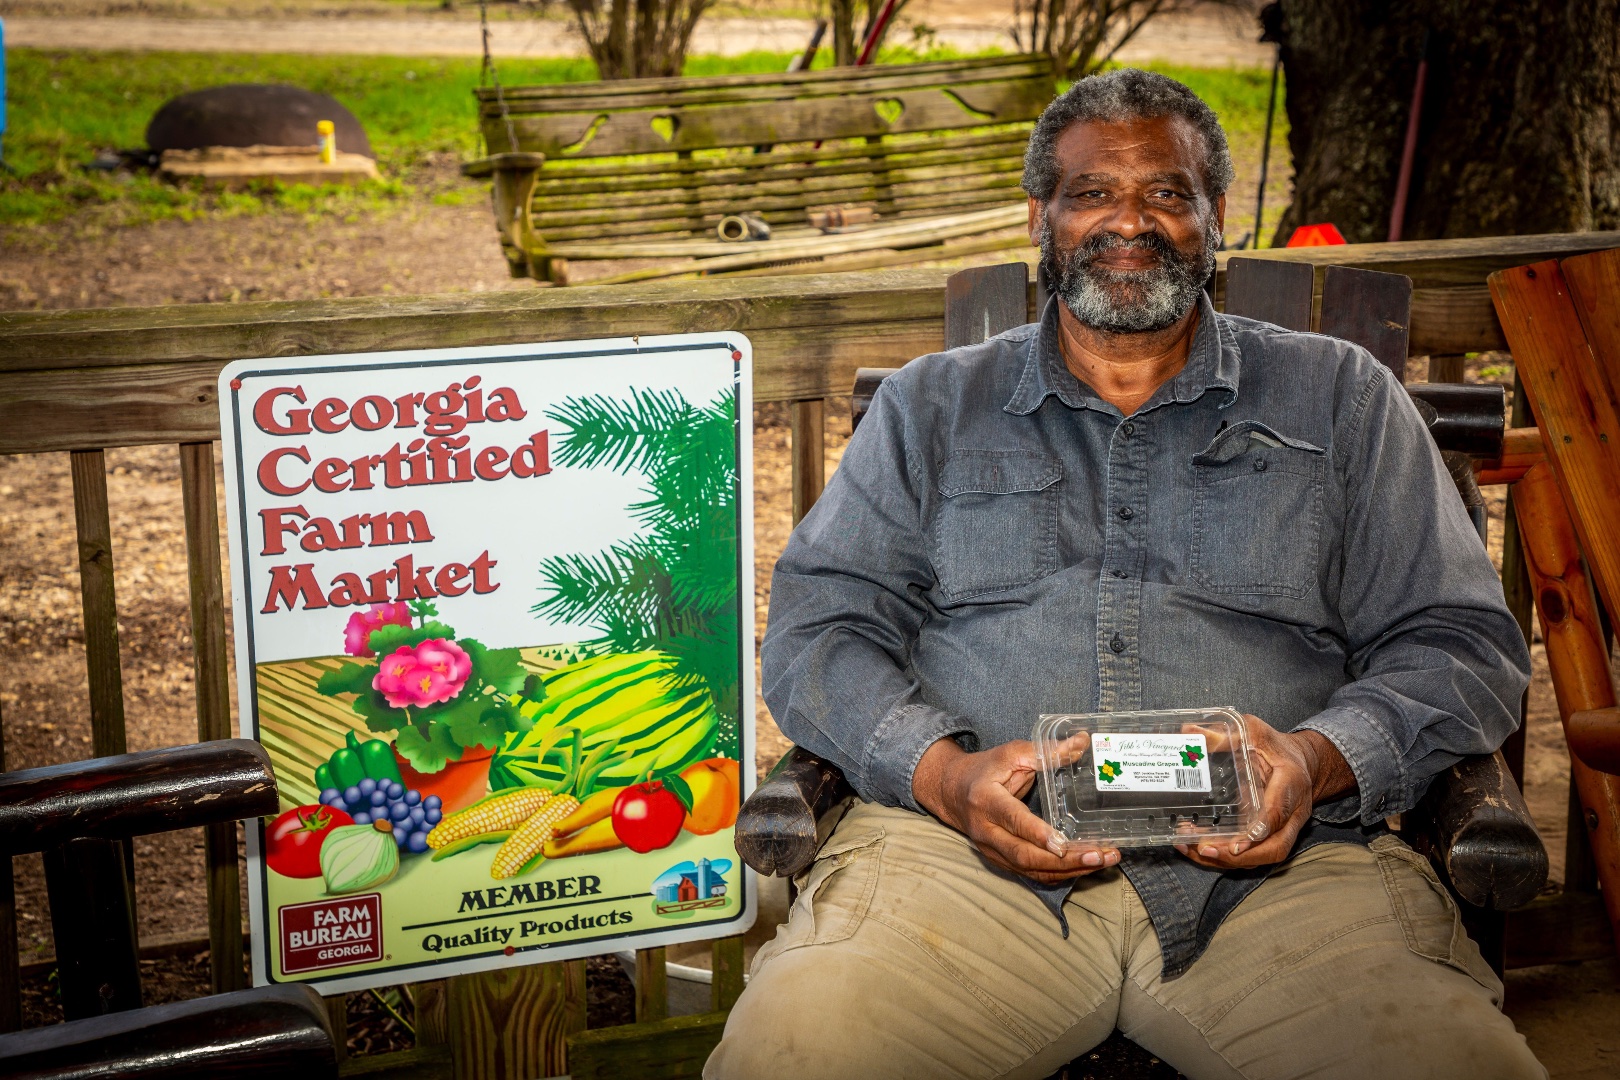 James sells his muscadines, peaches and plums locally as a Georgia Certified Farm Market.